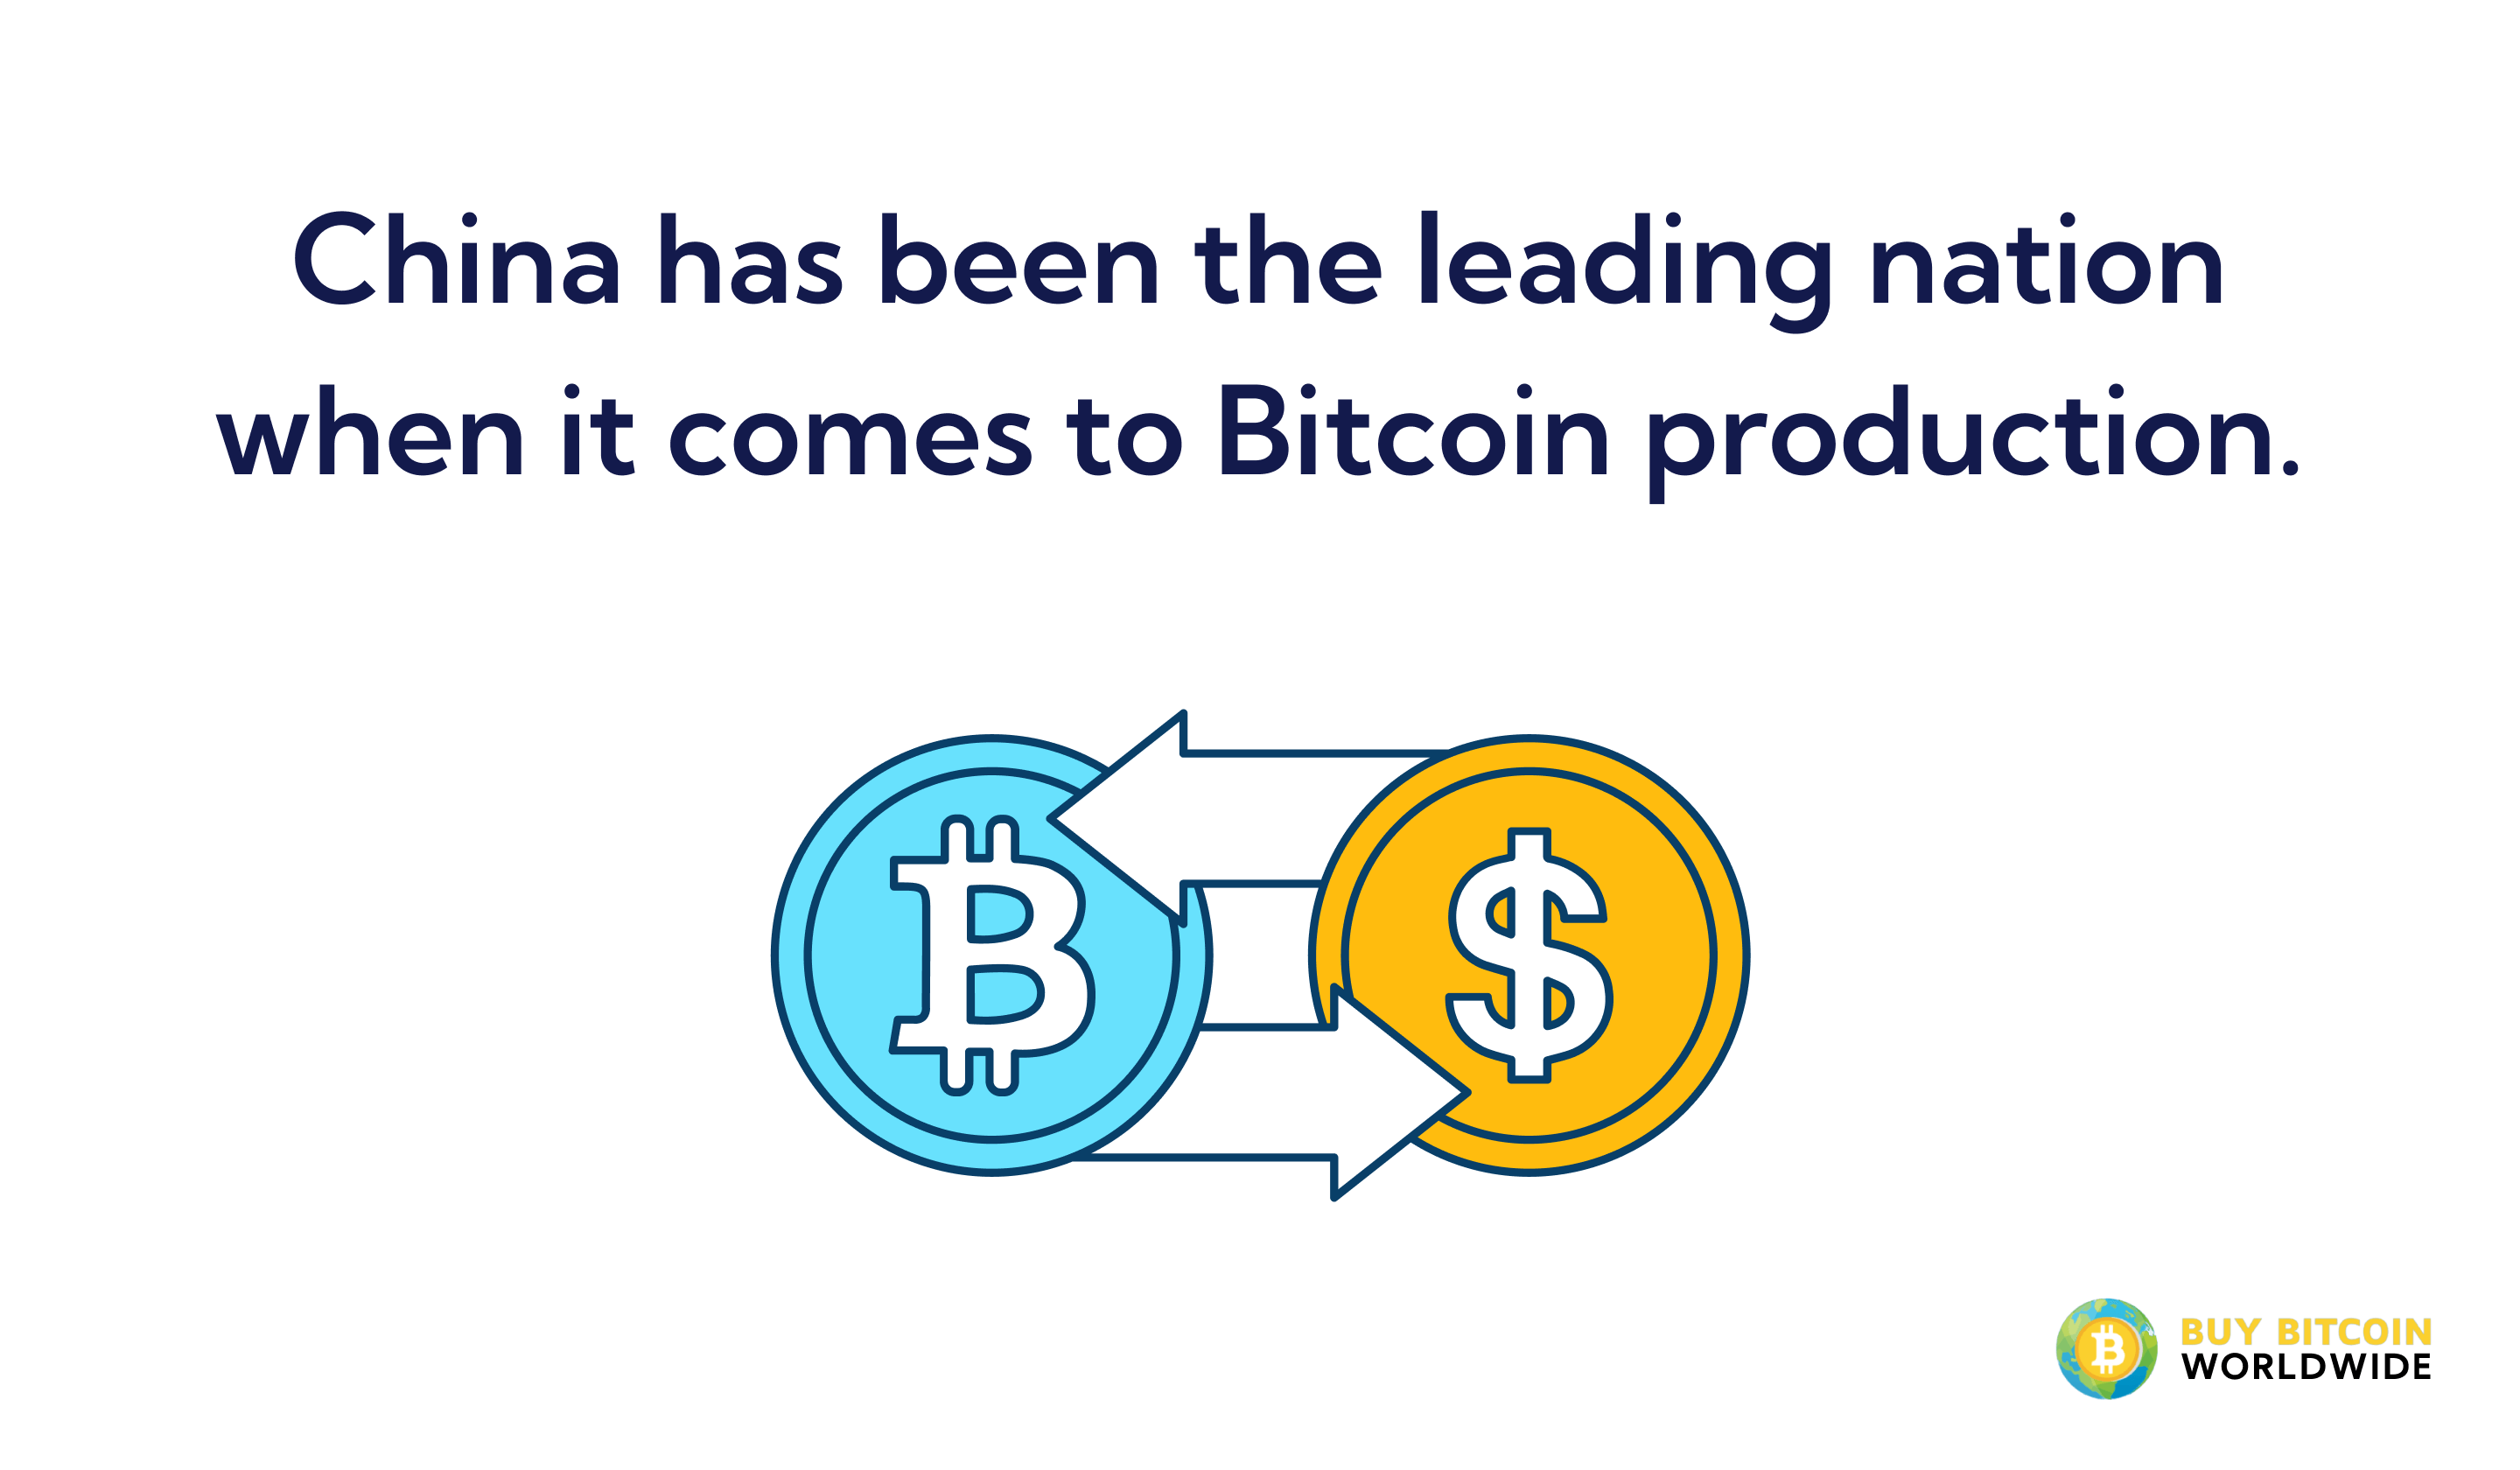 china is leading nation in bitcoin mining production